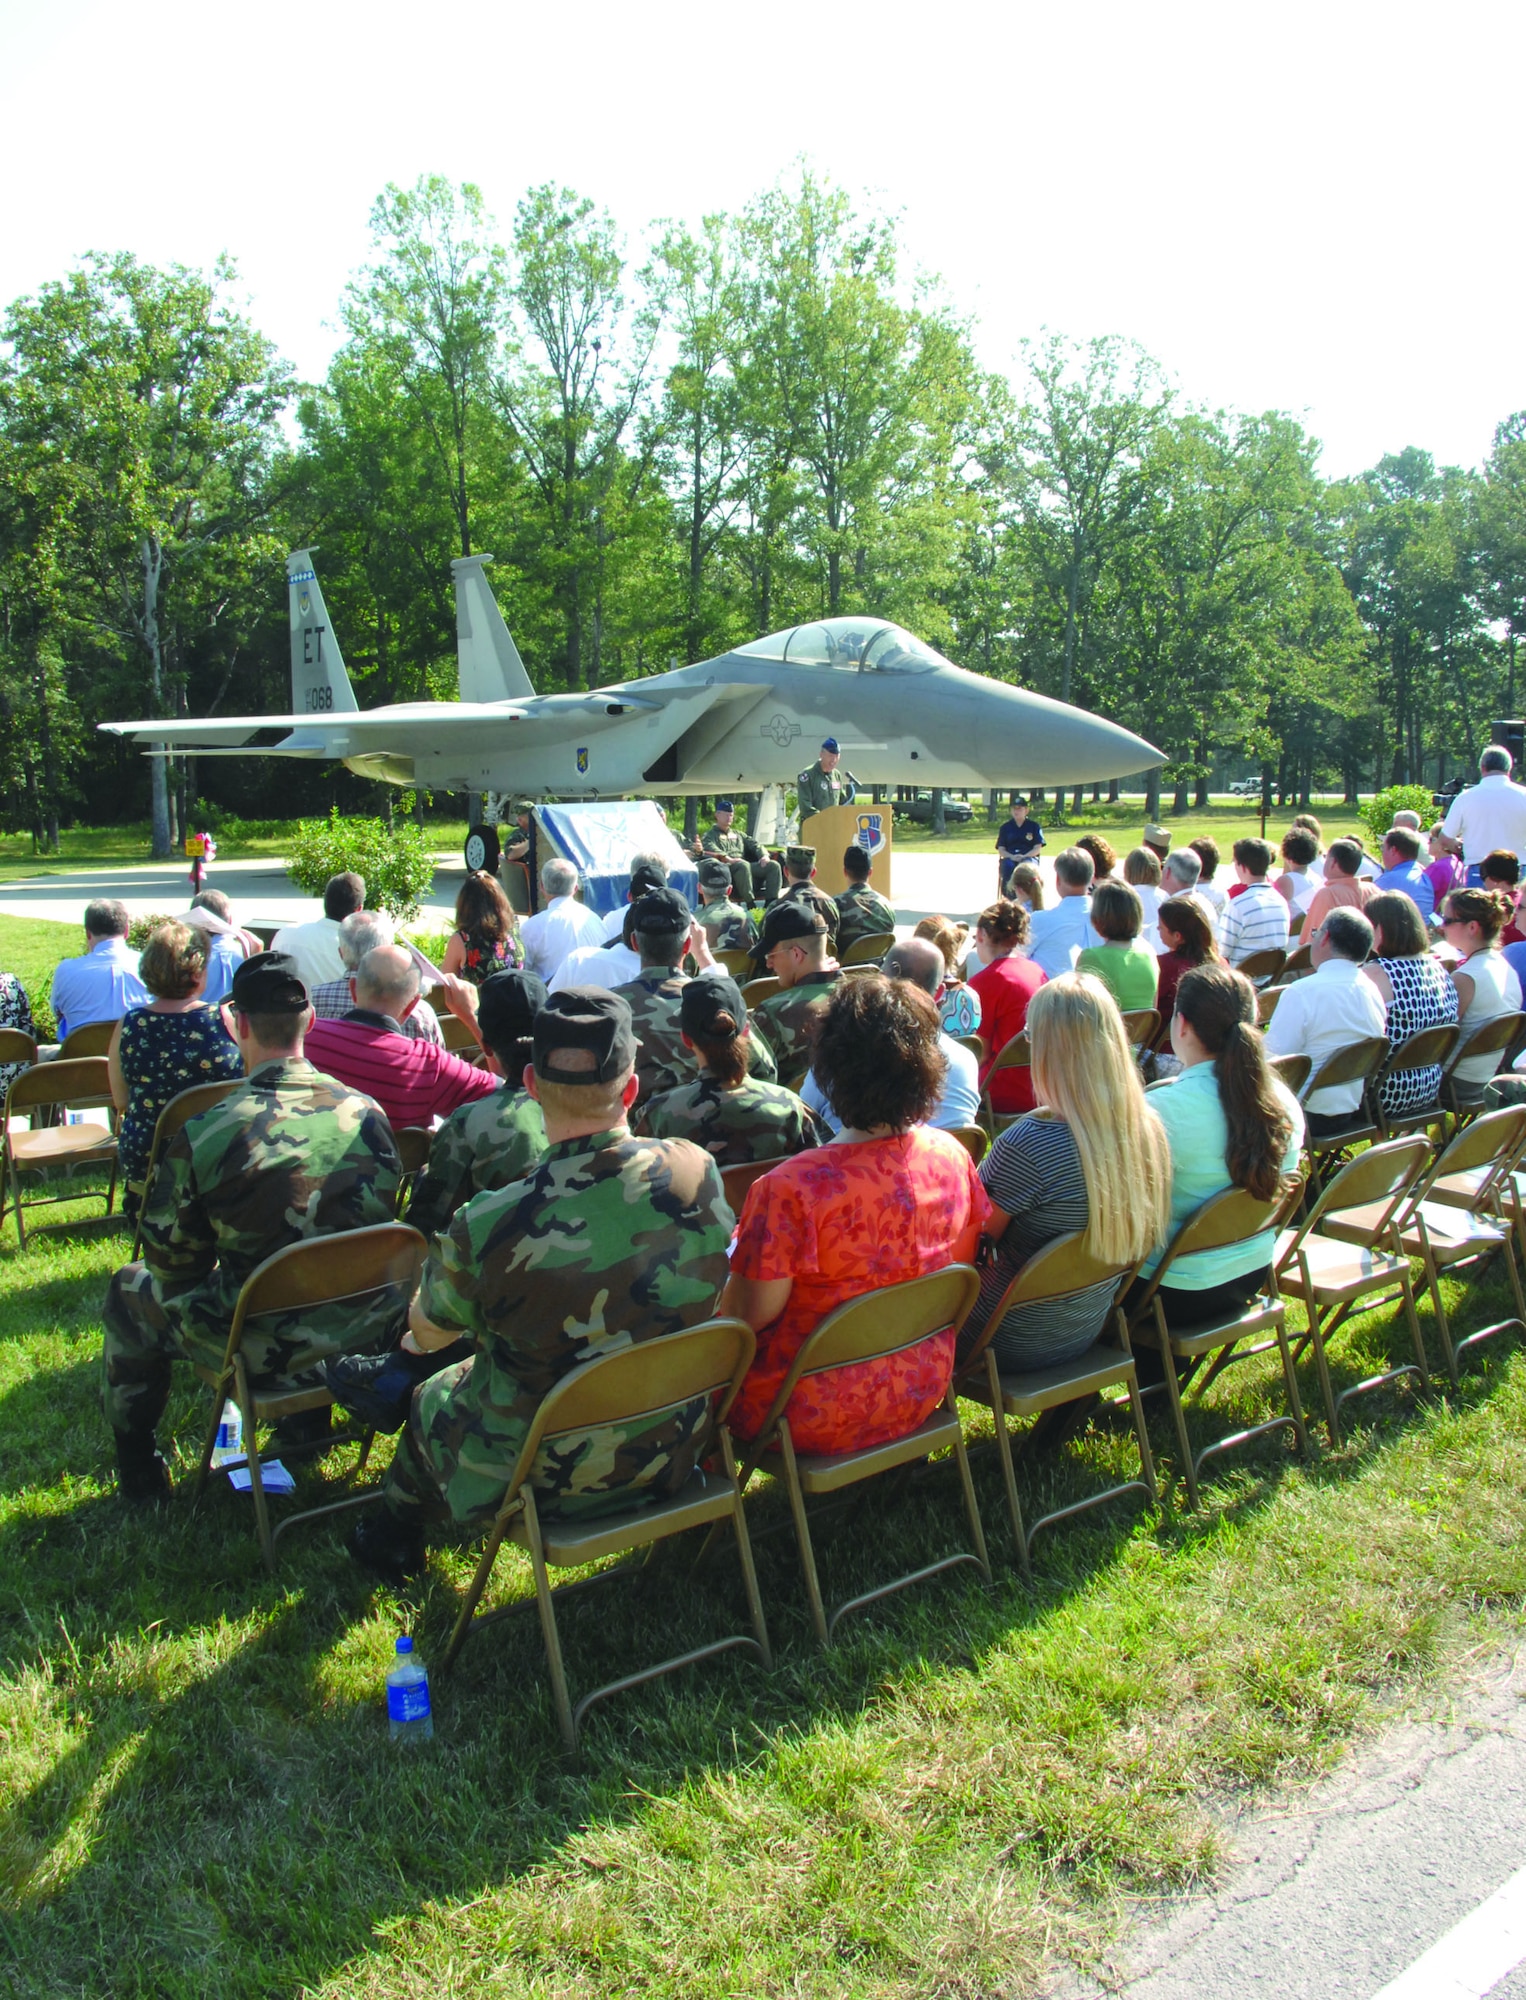 Brig. Gen. C.D. Moore II, then-commander of the 478th Aeronautical Systems Wing at Wright-Patterson Air Force Base, Ohio, speaks to attendees of the August 2007 ceremony to dedicate the F-15 Eagle static display at Arnold Air Force Base, Tenn., in memory of Maj. Jim Duricy. Duricy died April 30, 2002, when he was forced to eject at a high speed as the F-15C he piloted crashed into the Gulf of Mexico. His body was never found. A 12-year test pilot, Duricy was assigned to the 40th Flight Test Squadron based at Eglin Air Force Base, Fla., at the time of his death. He was on a captive flight development test of a new missile when the aircraft crashed. (U.S. Air Force photo by David Housch)